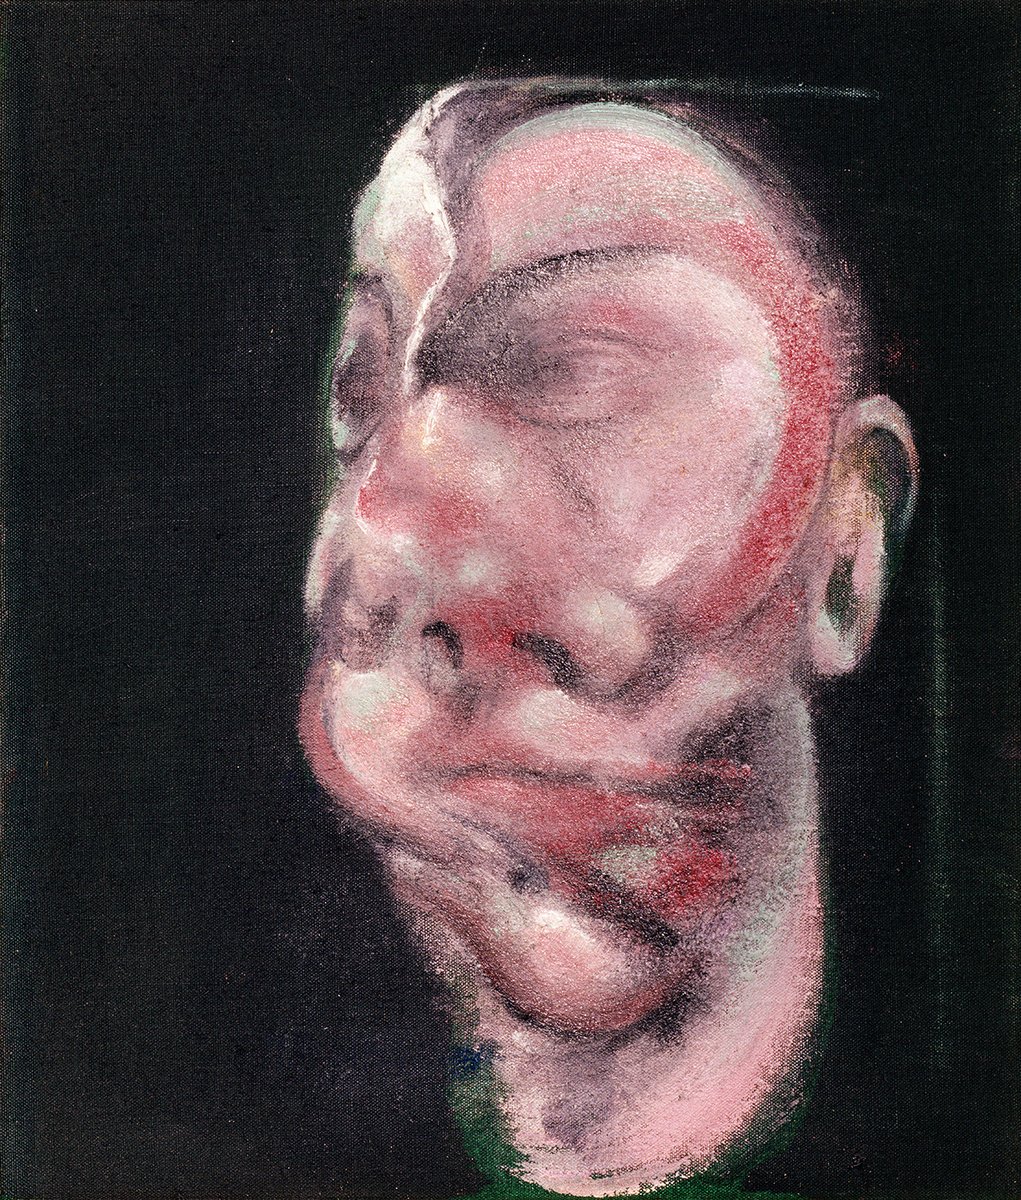 'Melville called the centre panel: 'Perhaps the finest self-portrait to be painted in the four centuries since Rembrandt painted himself at old age'.'  

Bacon Review, pg 65  

Painting: Study for Three Heads, 1962

#francisbacon #fineart #art #historyofart #arthistory